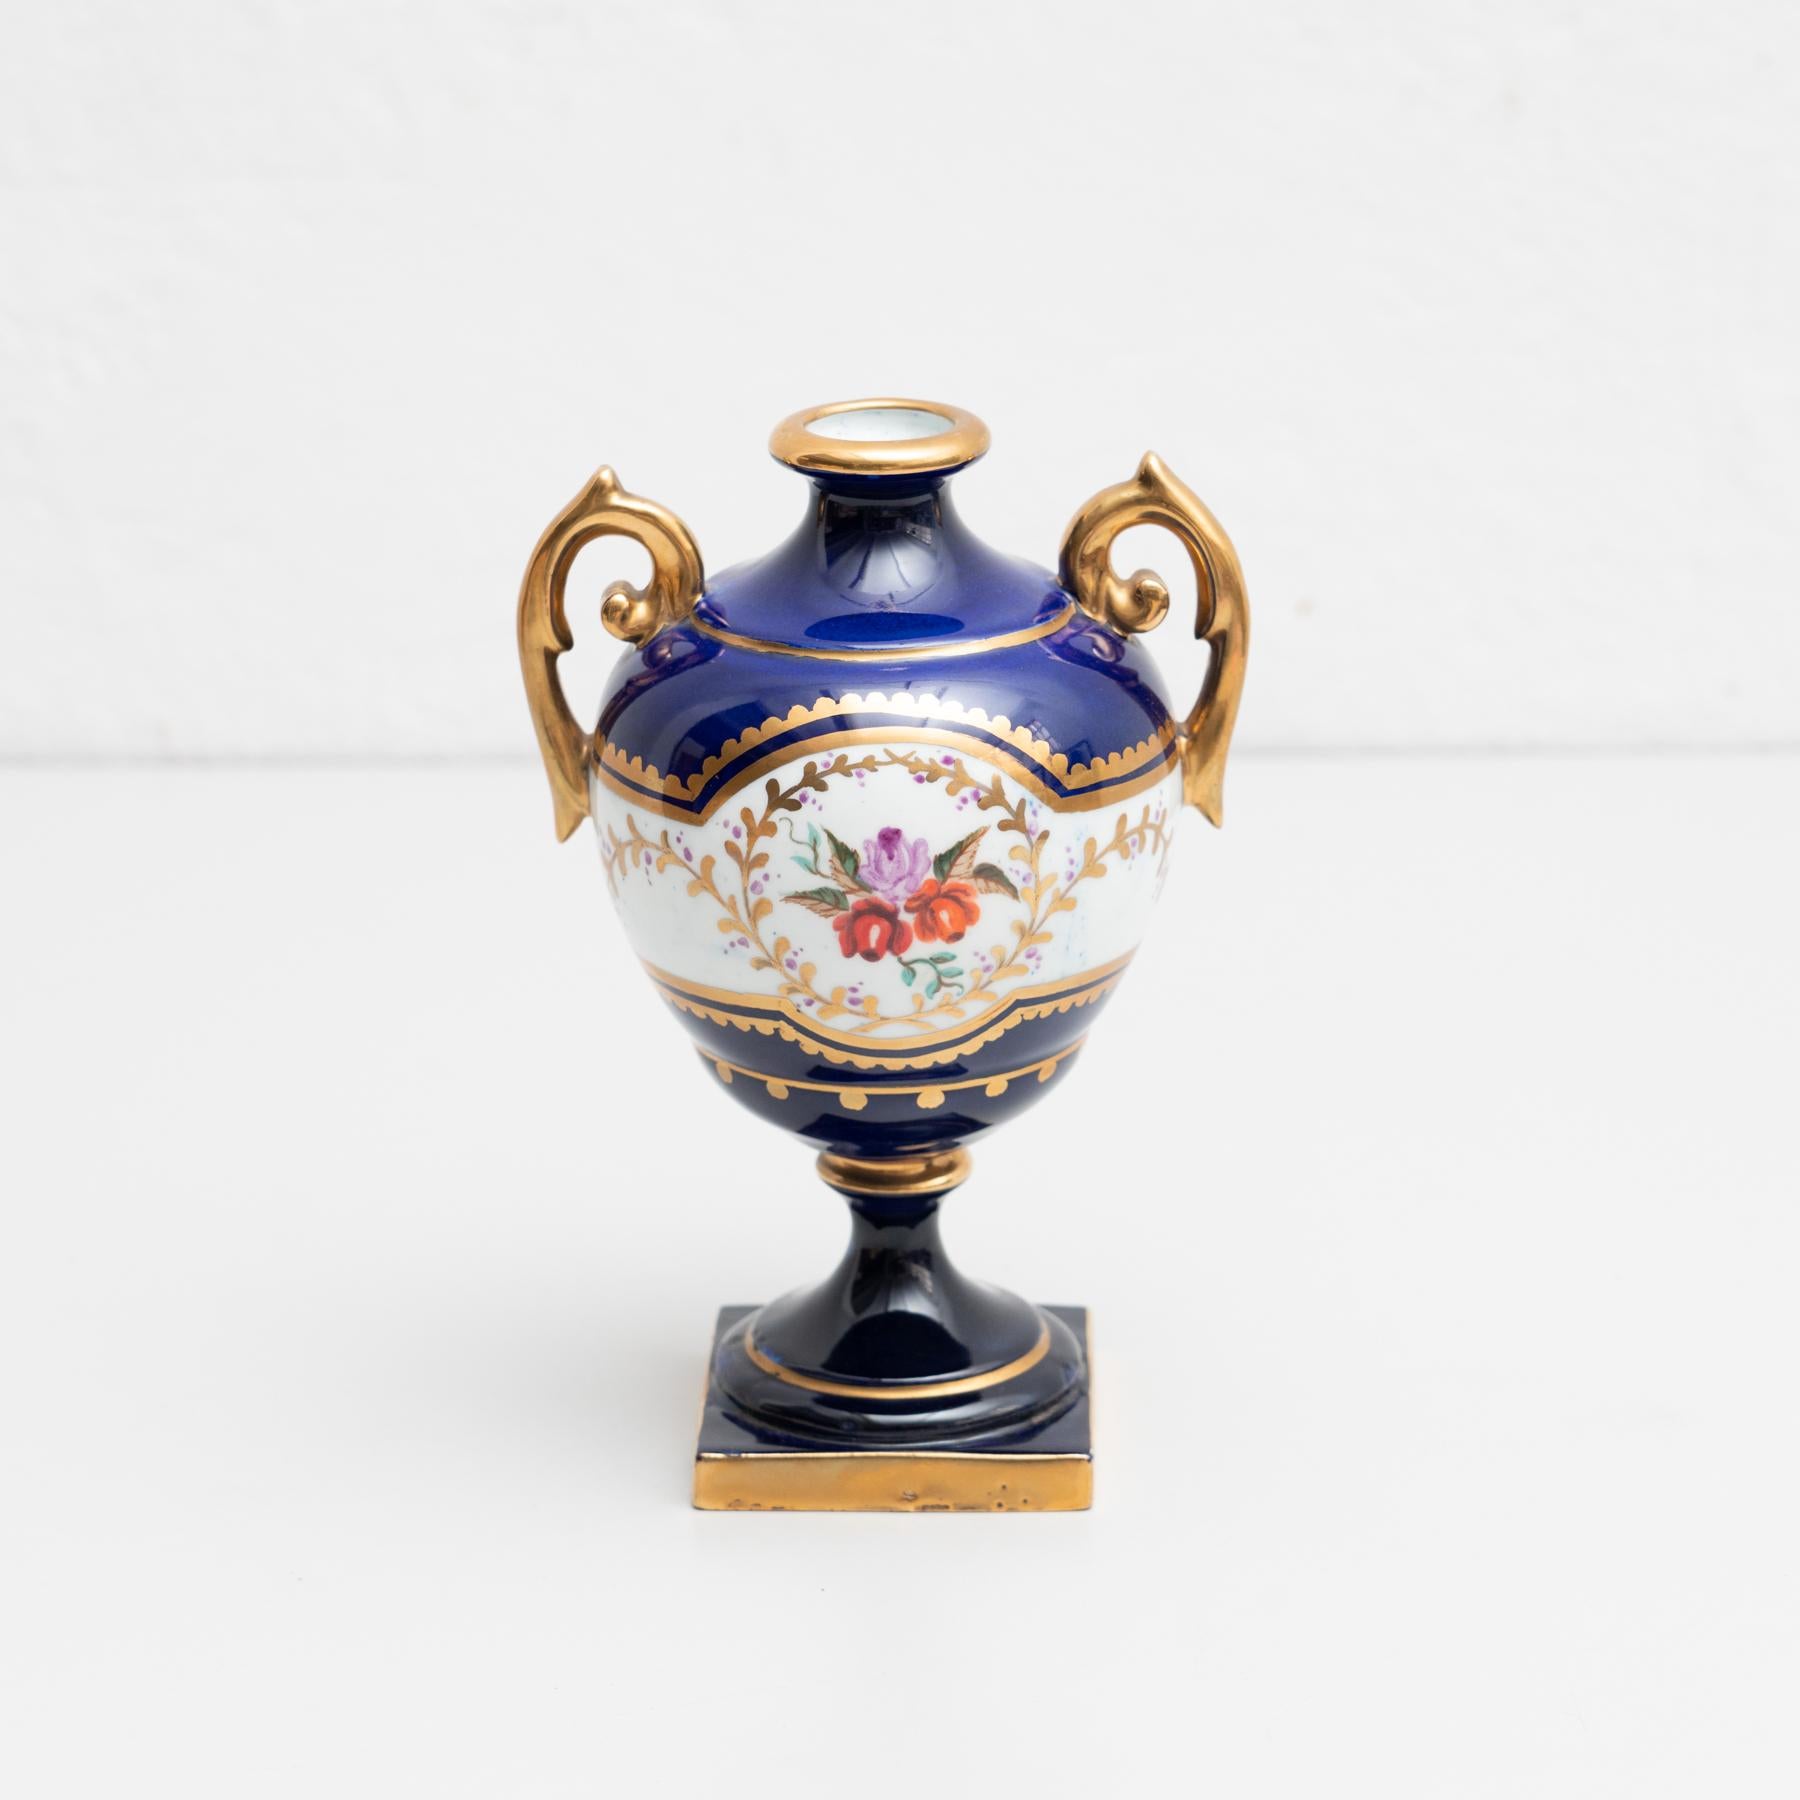 Isabelline hand-painted porcelain vase in the Serves style. 

Made by unknown manufacturer in Spain, circa 19th century.

In original condition, with minor wear consistent with age and use, preserving a beautiful